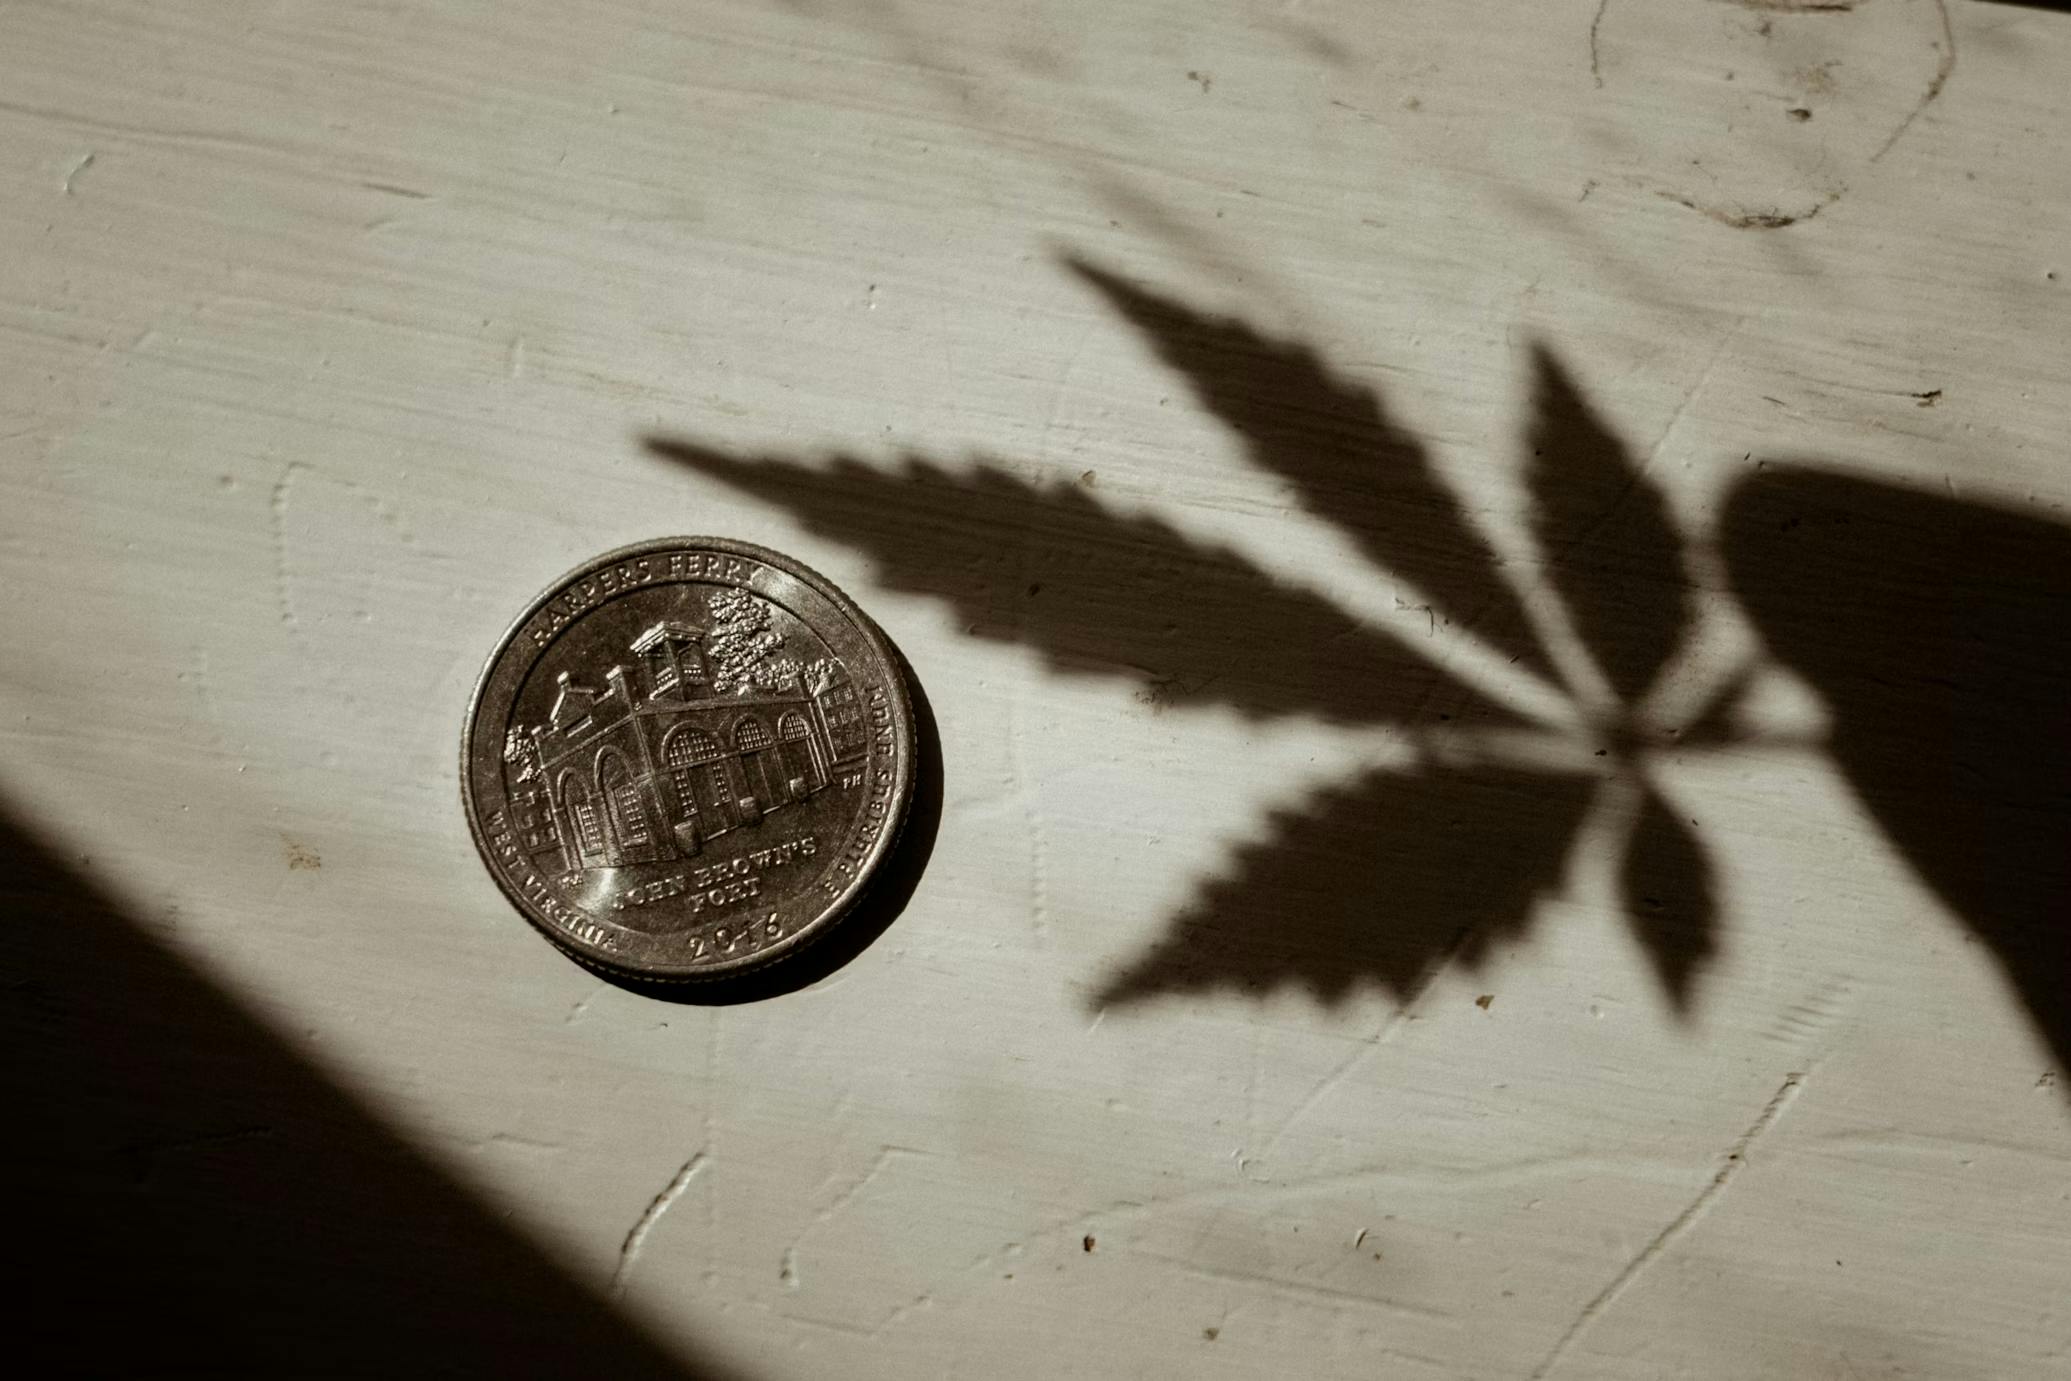 A quarter with the shadow of a cannabis leaf